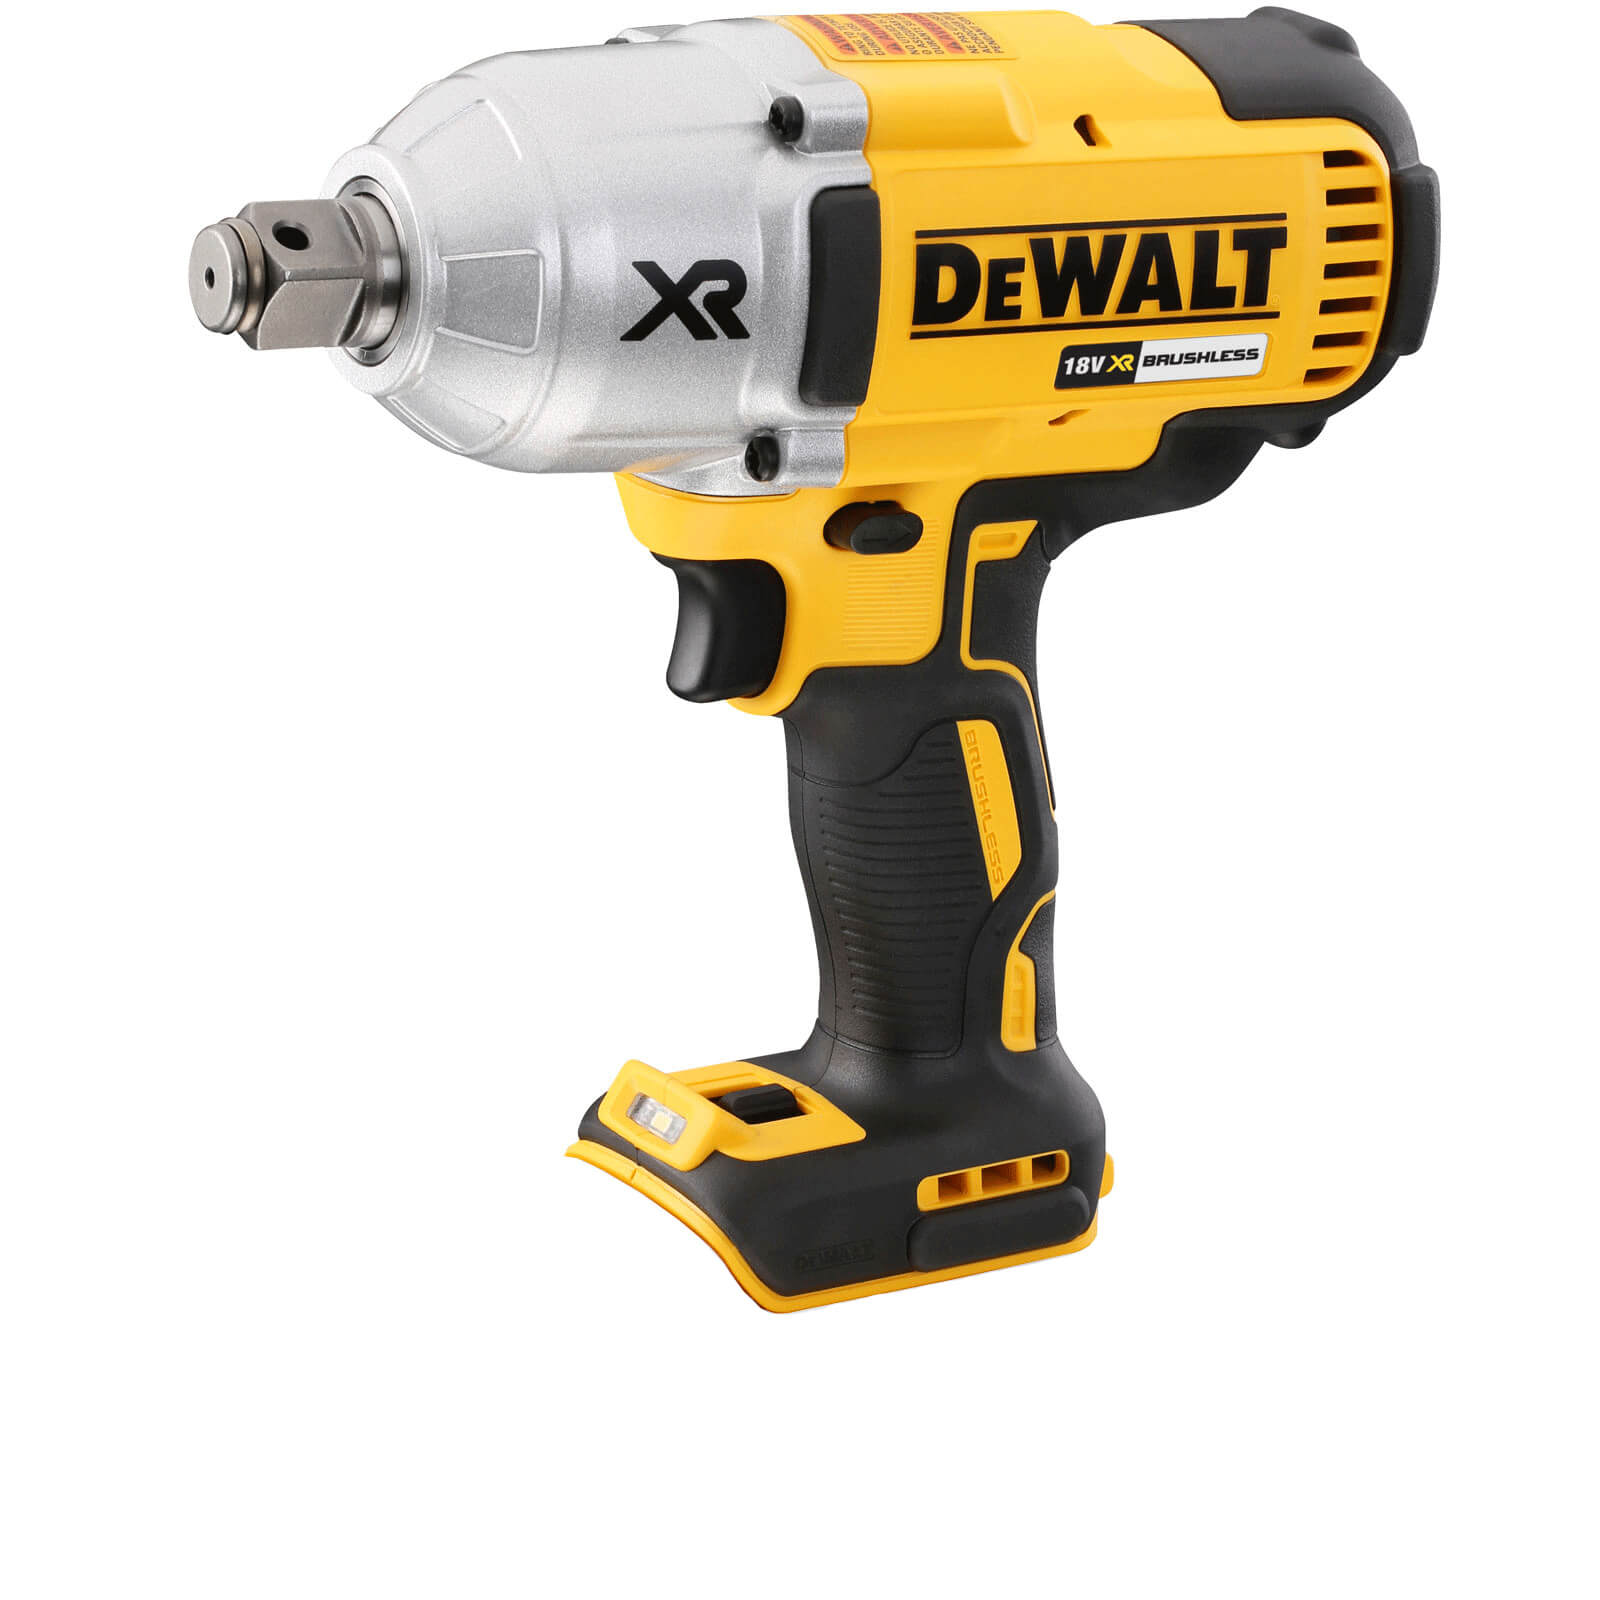 Image of DeWalt DCF897 18v XR Cordless Brushless 3/4" Drive Impact Wrench No Batteries No Charger No Case